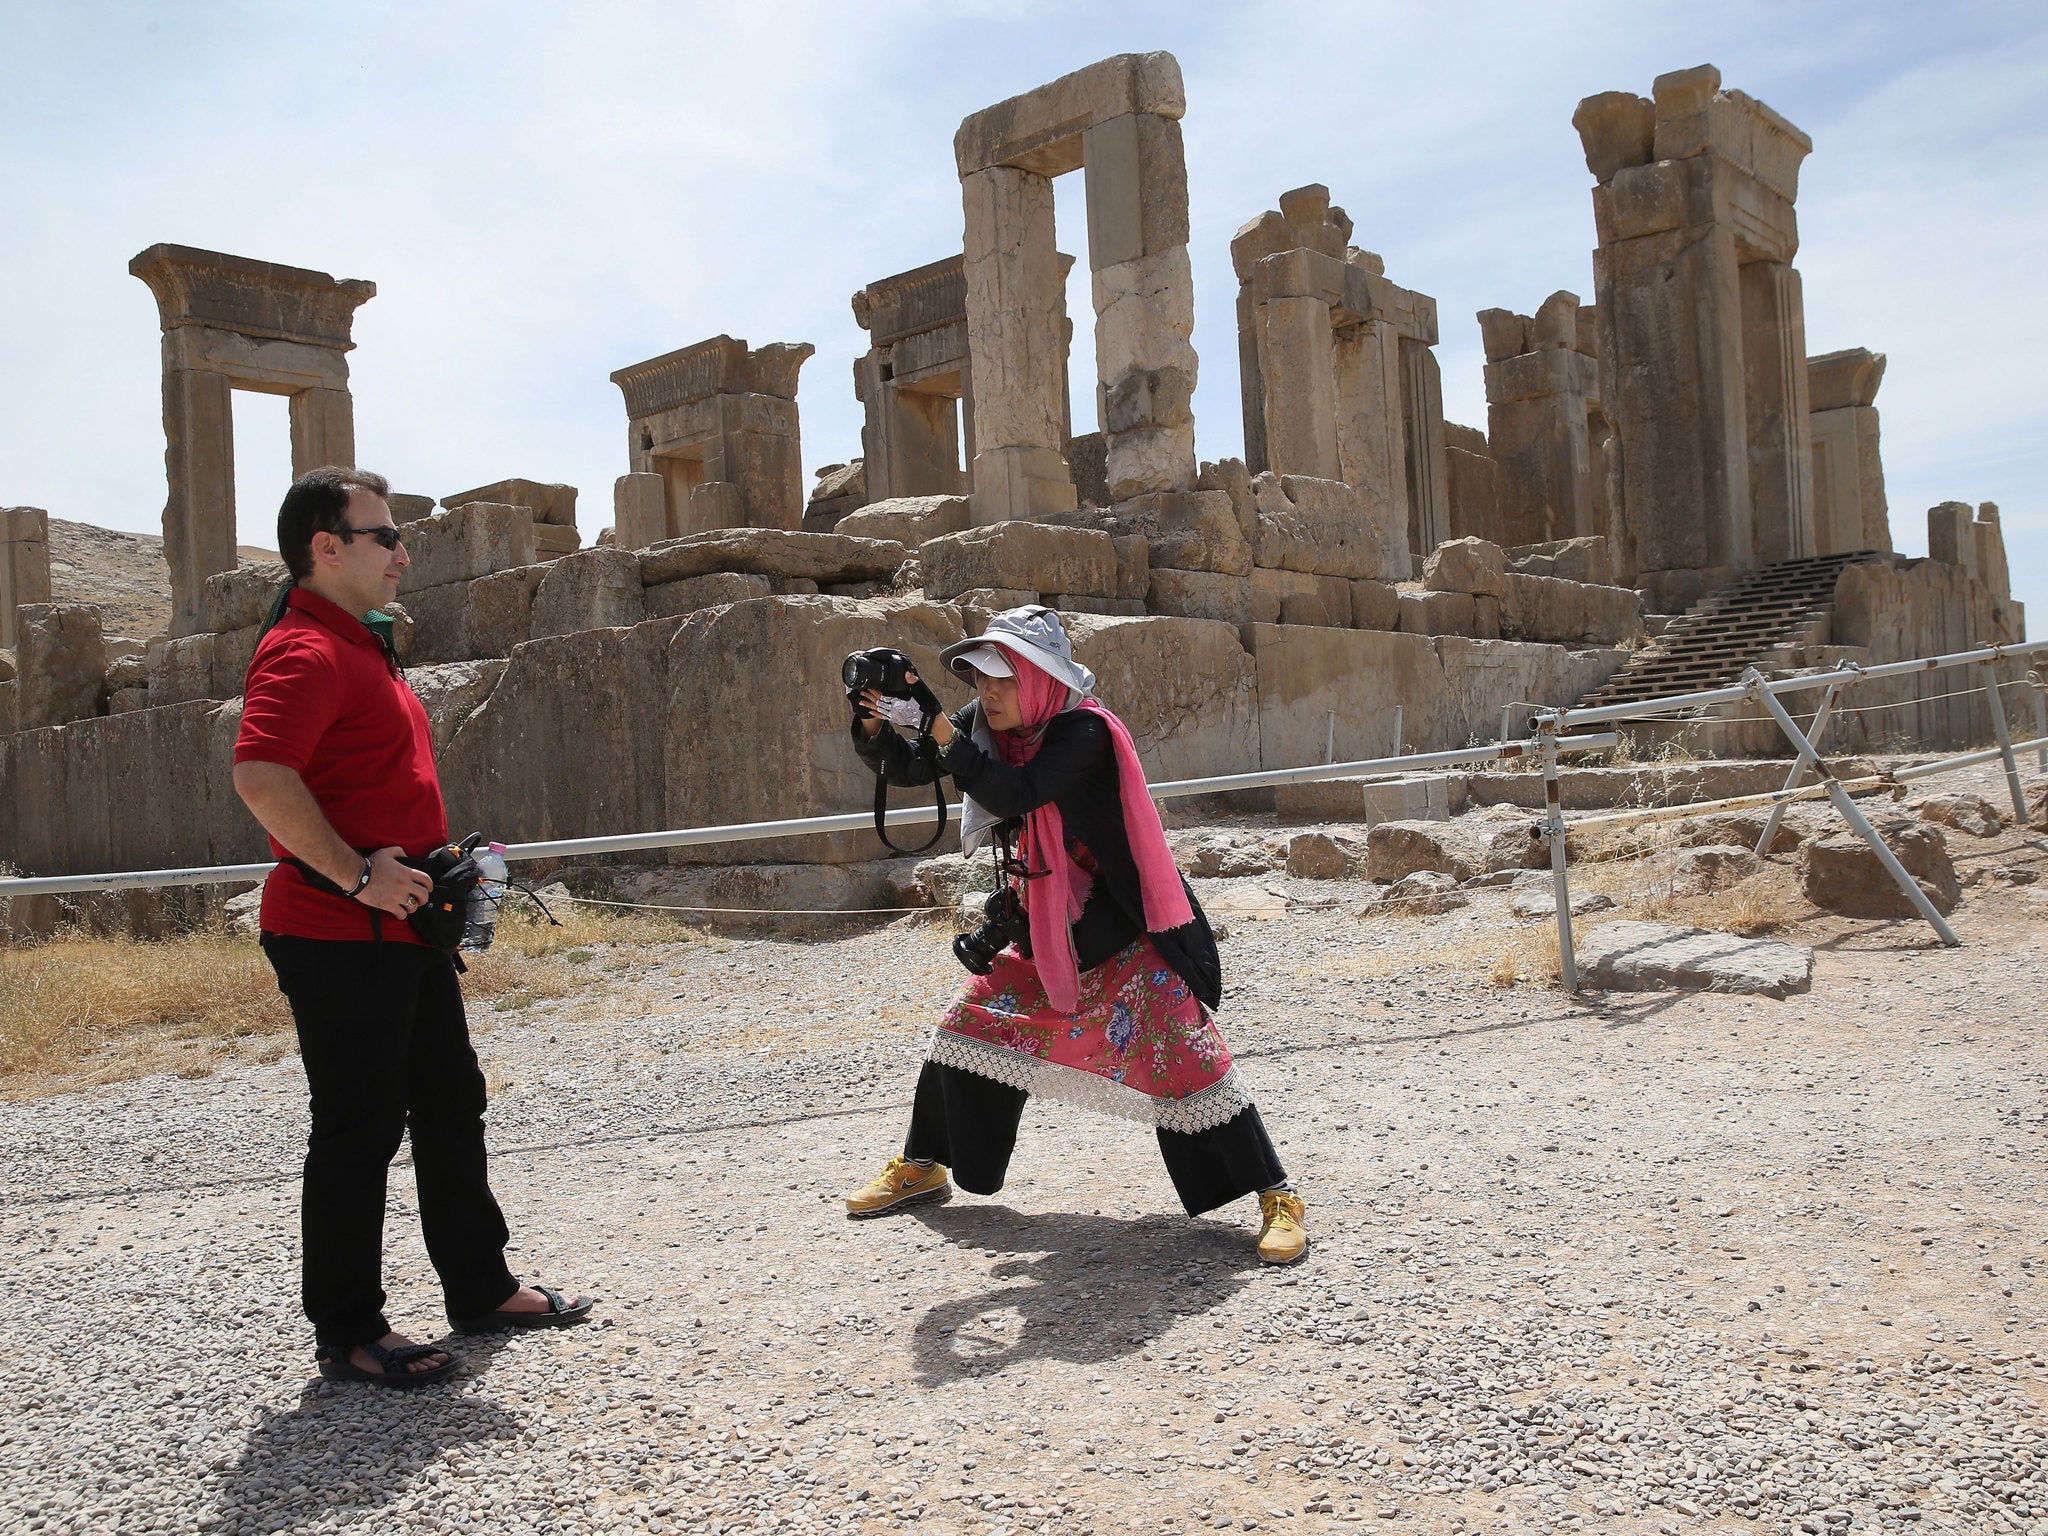 A Taiwanese tourist photographs a man at Persepolis in Iran in 2014